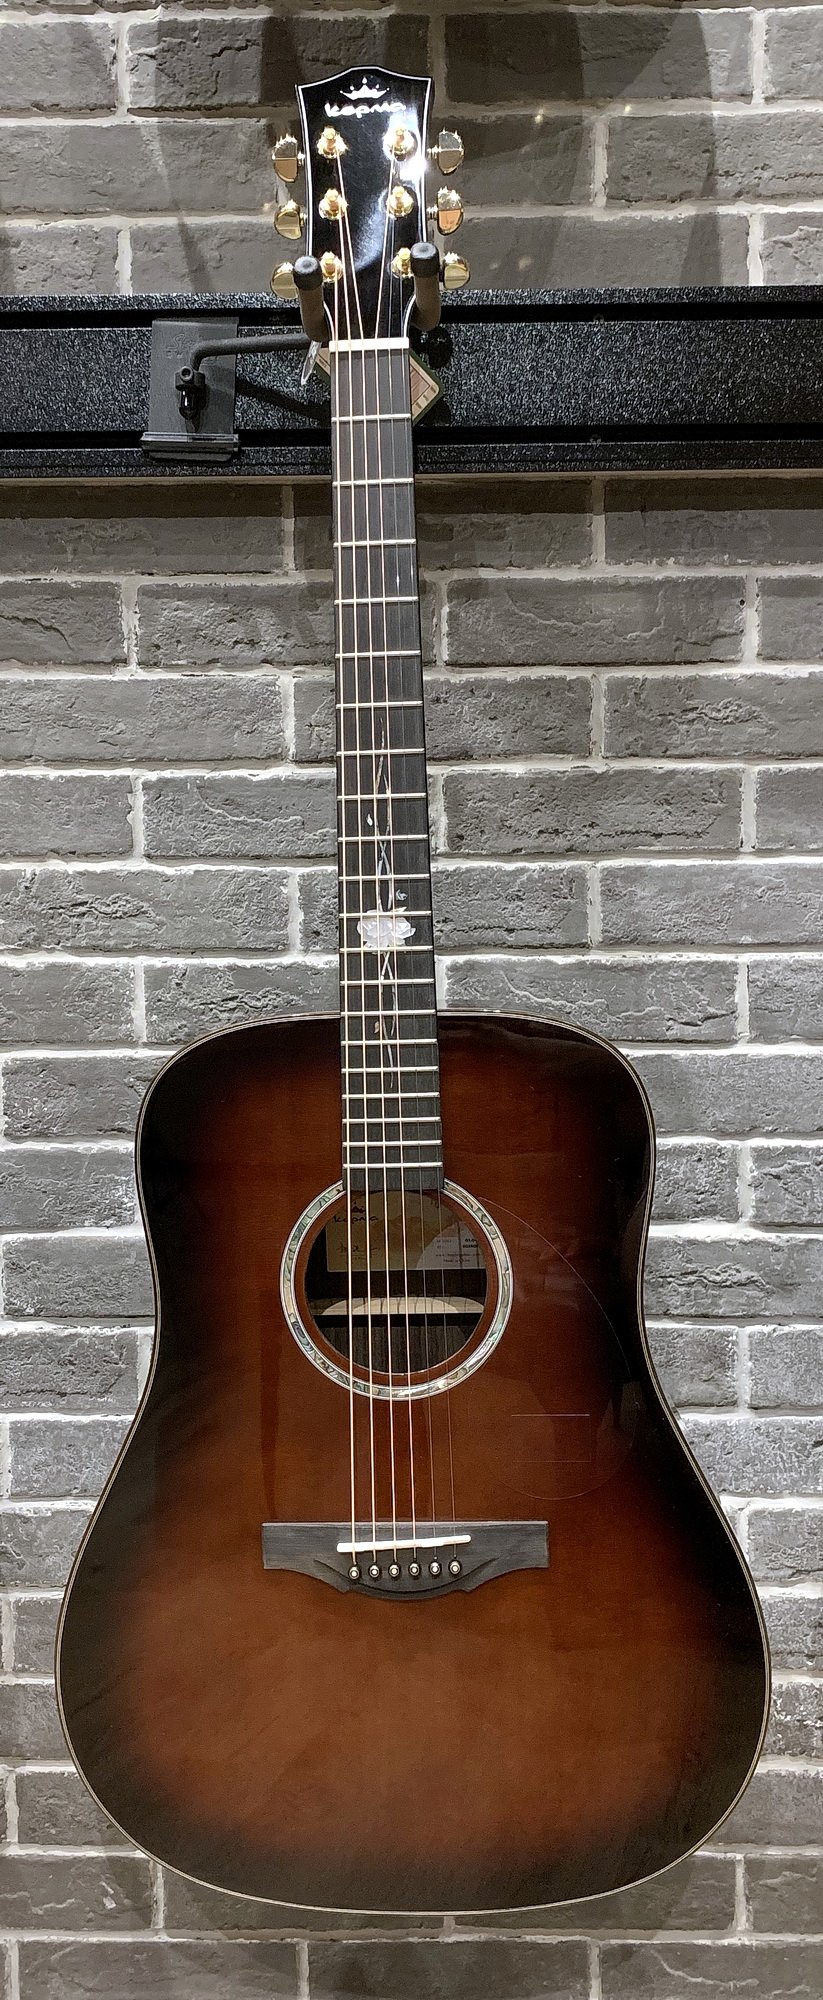 Kepma G1 D WA Solid Top Acoustic Guitar with TKL hardshell case